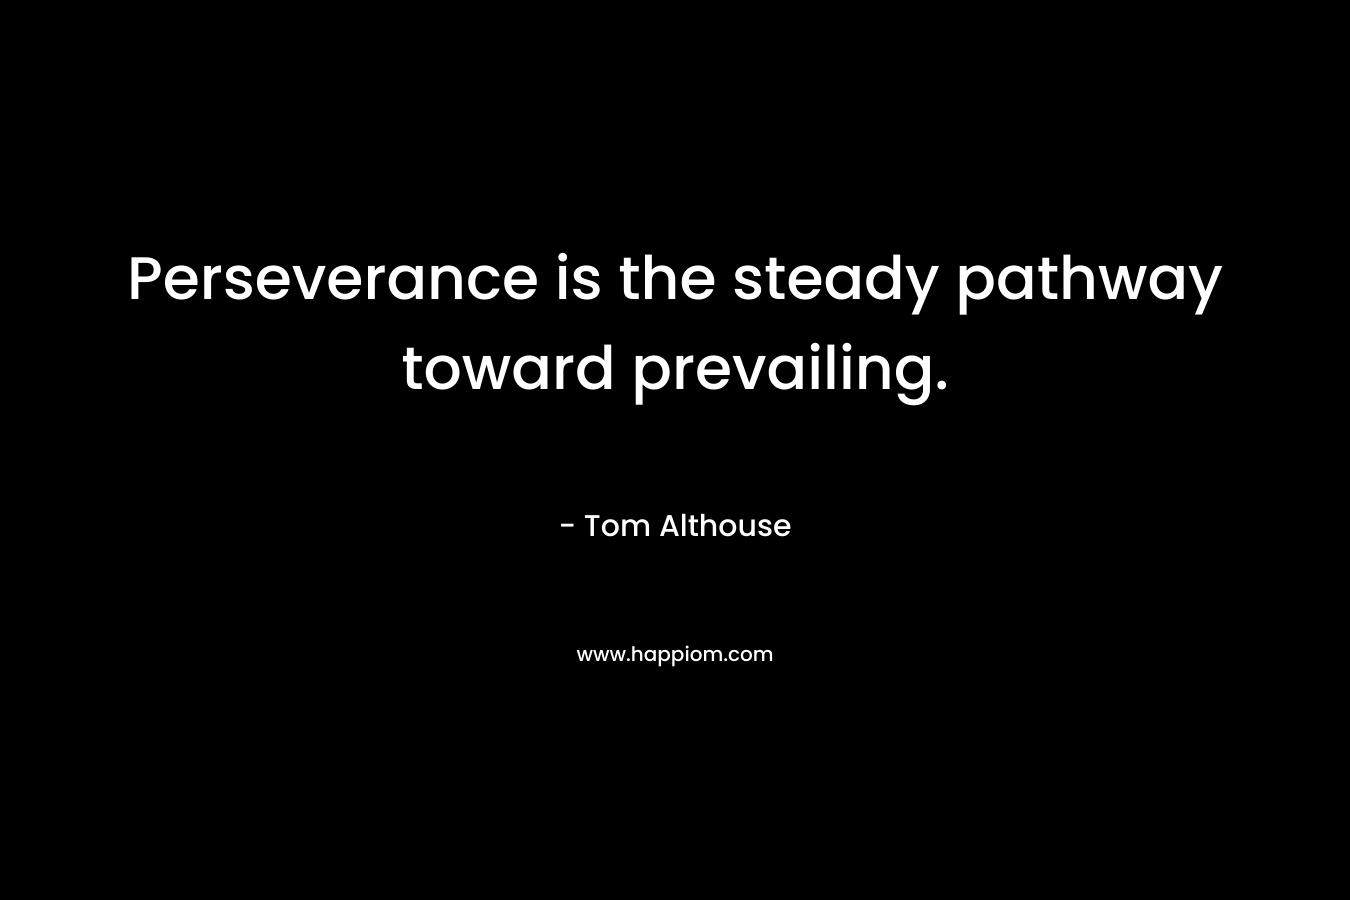 Perseverance is the steady pathway toward prevailing. – Tom Althouse